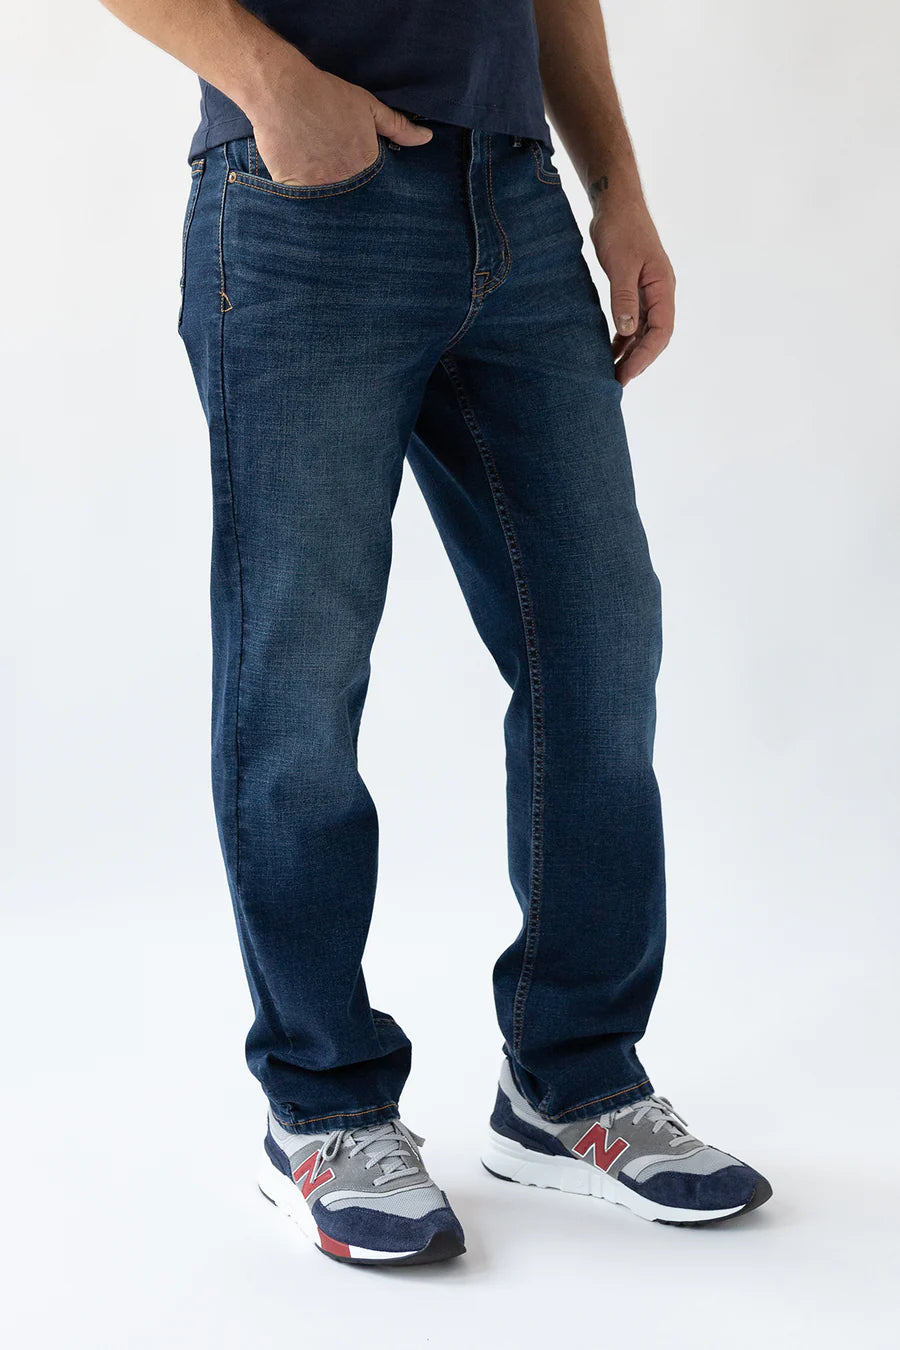 Devil Dog Relaxed Straight Jean - Boone Wash